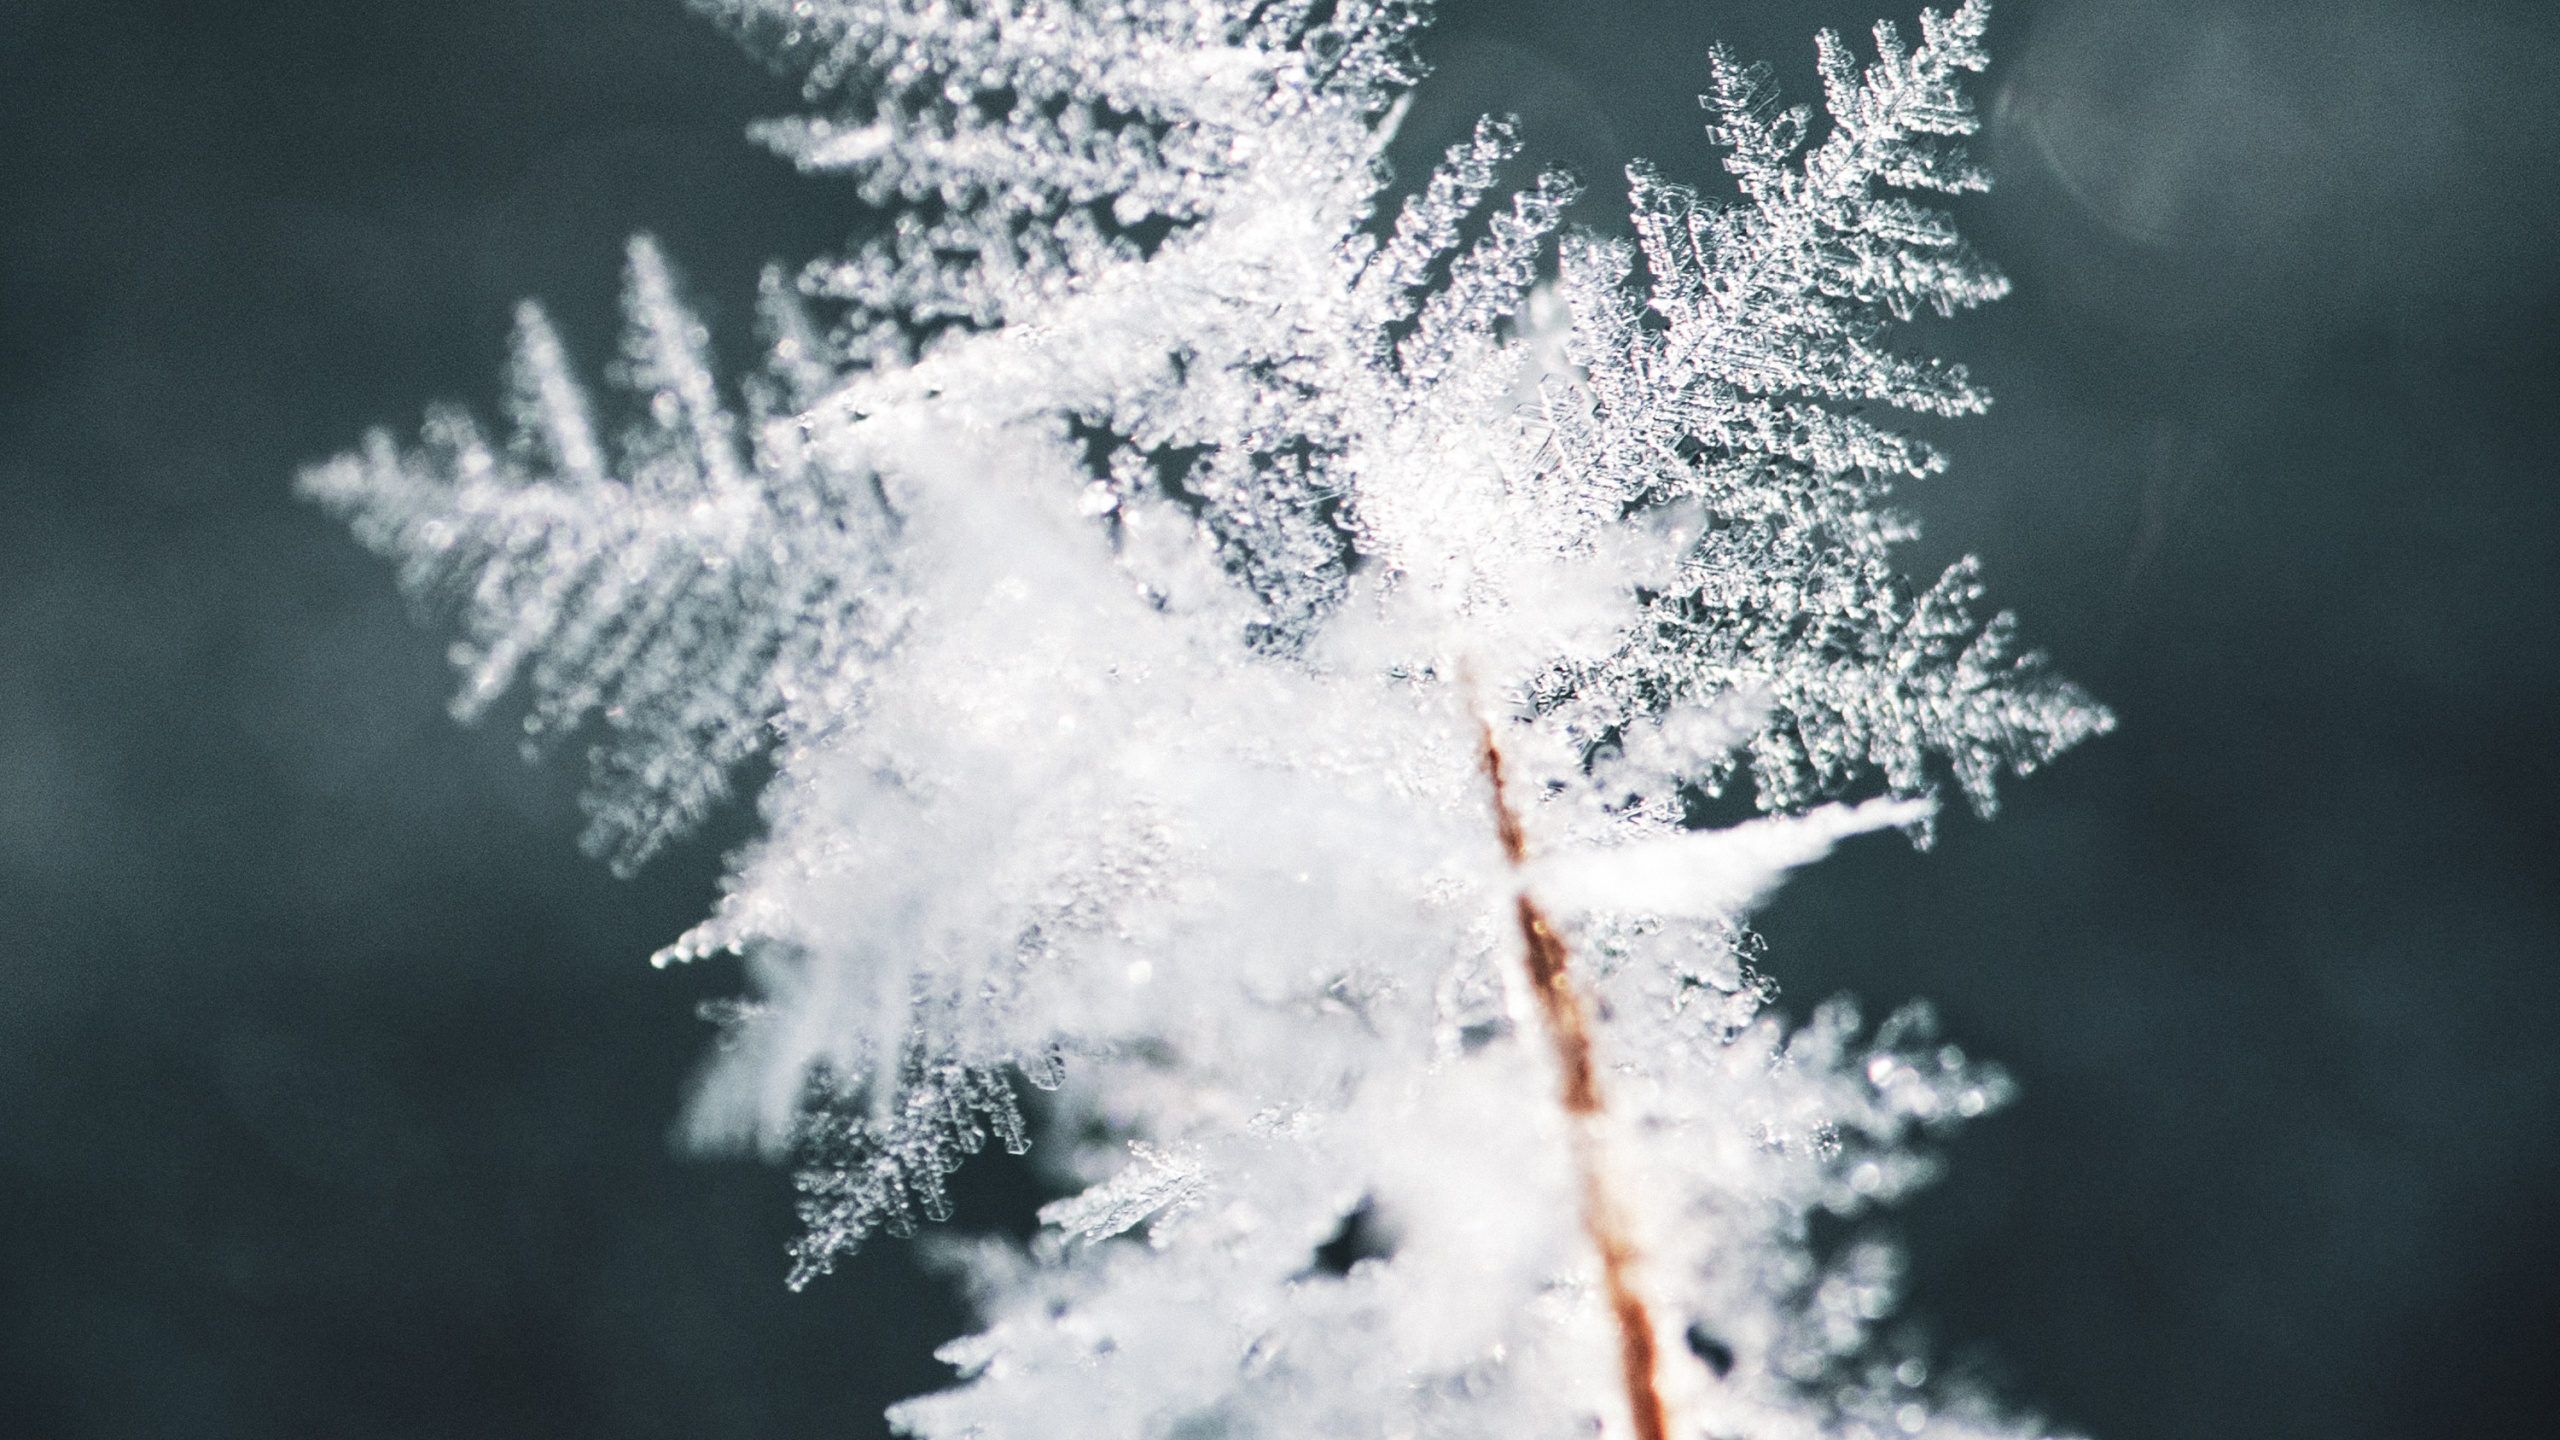 Winter, Snow, Frost, Freezing, Branch. Wallpaper in 2560x1440 Resolution